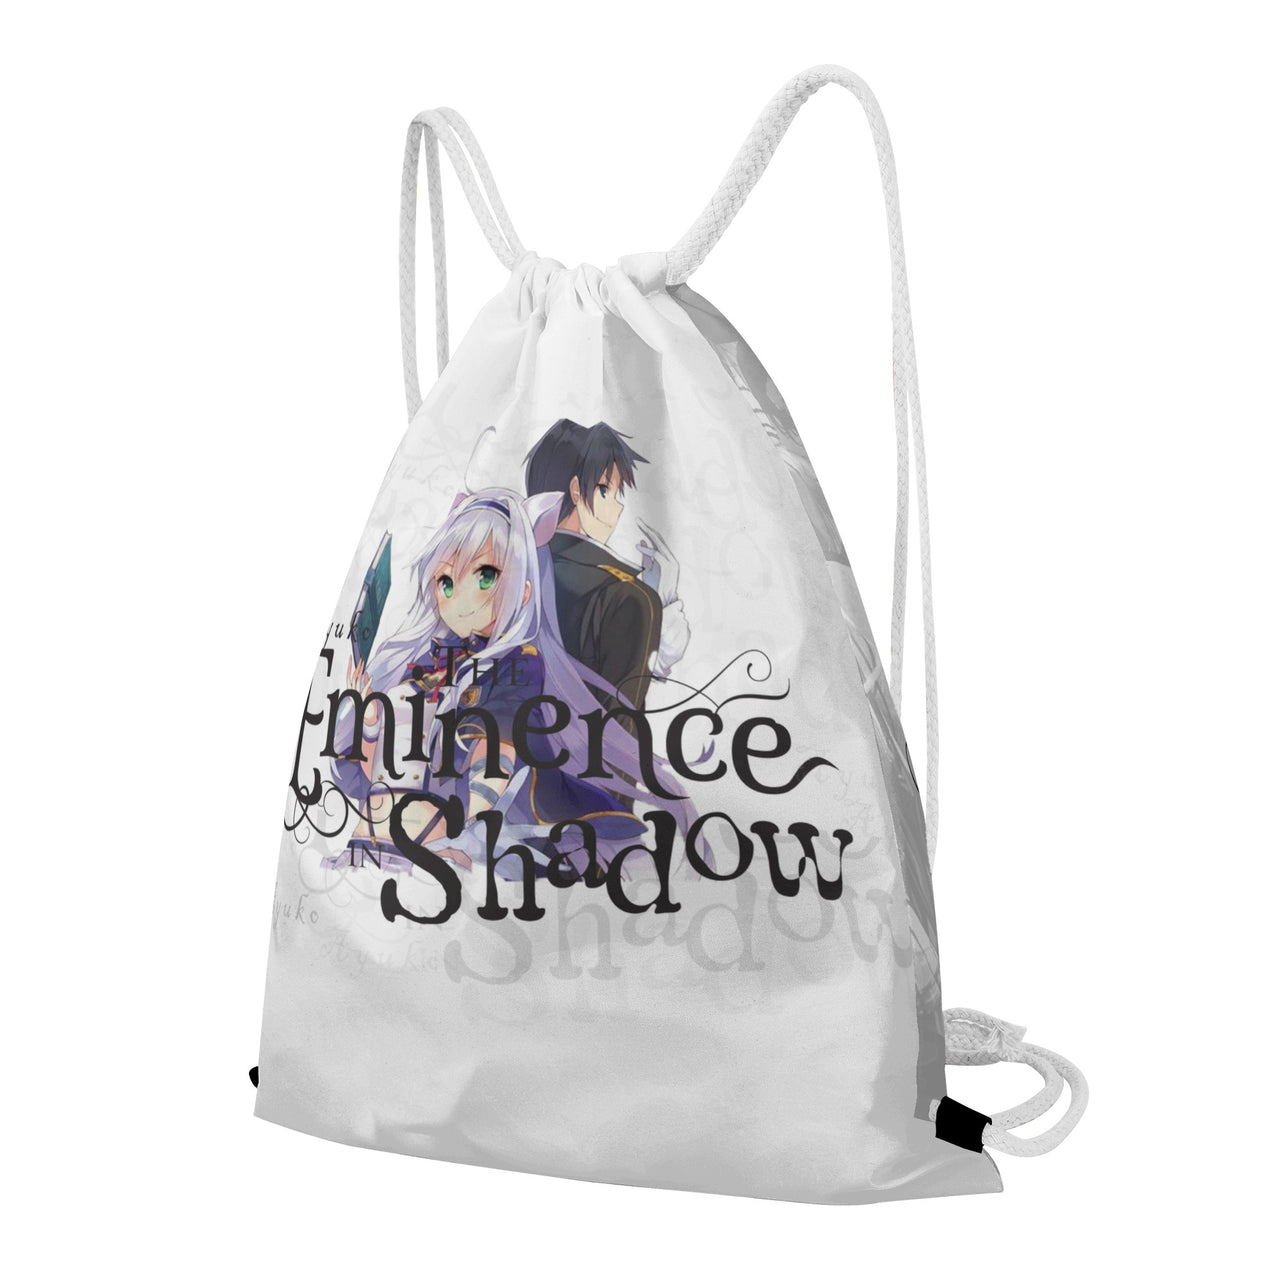 The Eminence in Shadow Anime Drawstring Bag